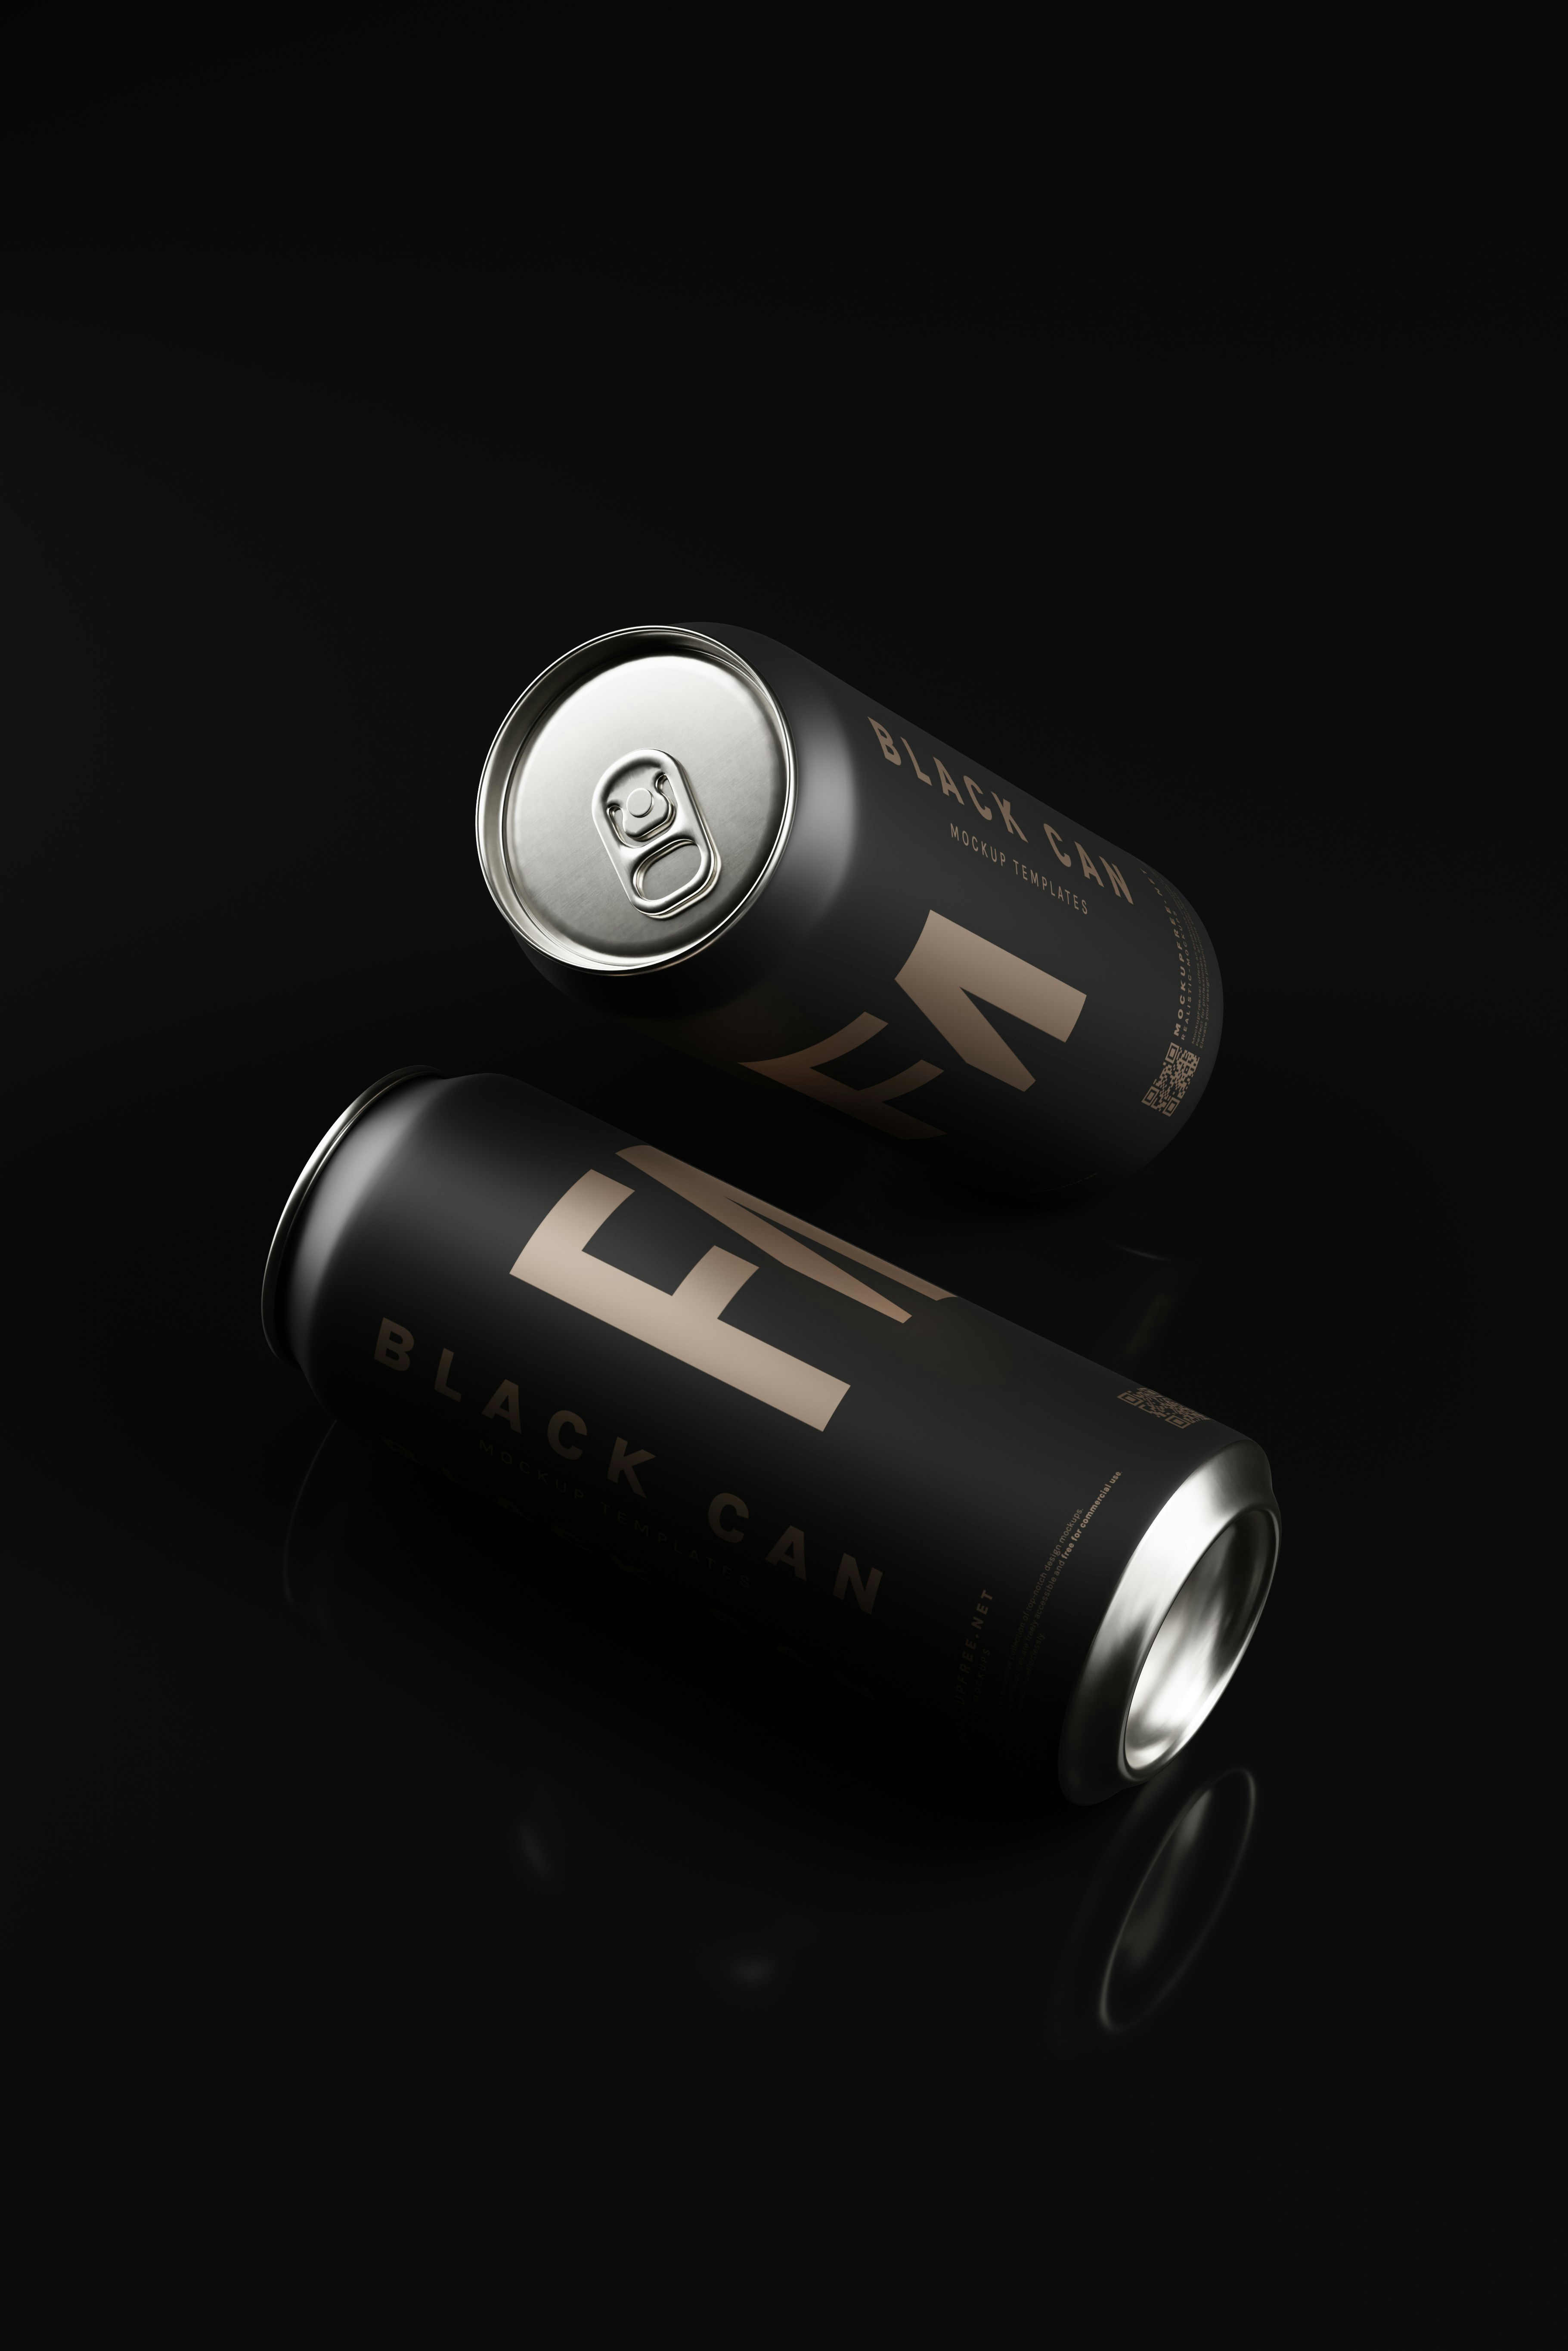 Black Soda or Beer Aluminum Can Mockup Collection. A dark mockup set for beer or soda aluminum can packaging. Download the PSD version of this mockup for free from Mockup Free : https://mockupfree.net/black-soda-or-beer-aluminum-can-mockup-collection